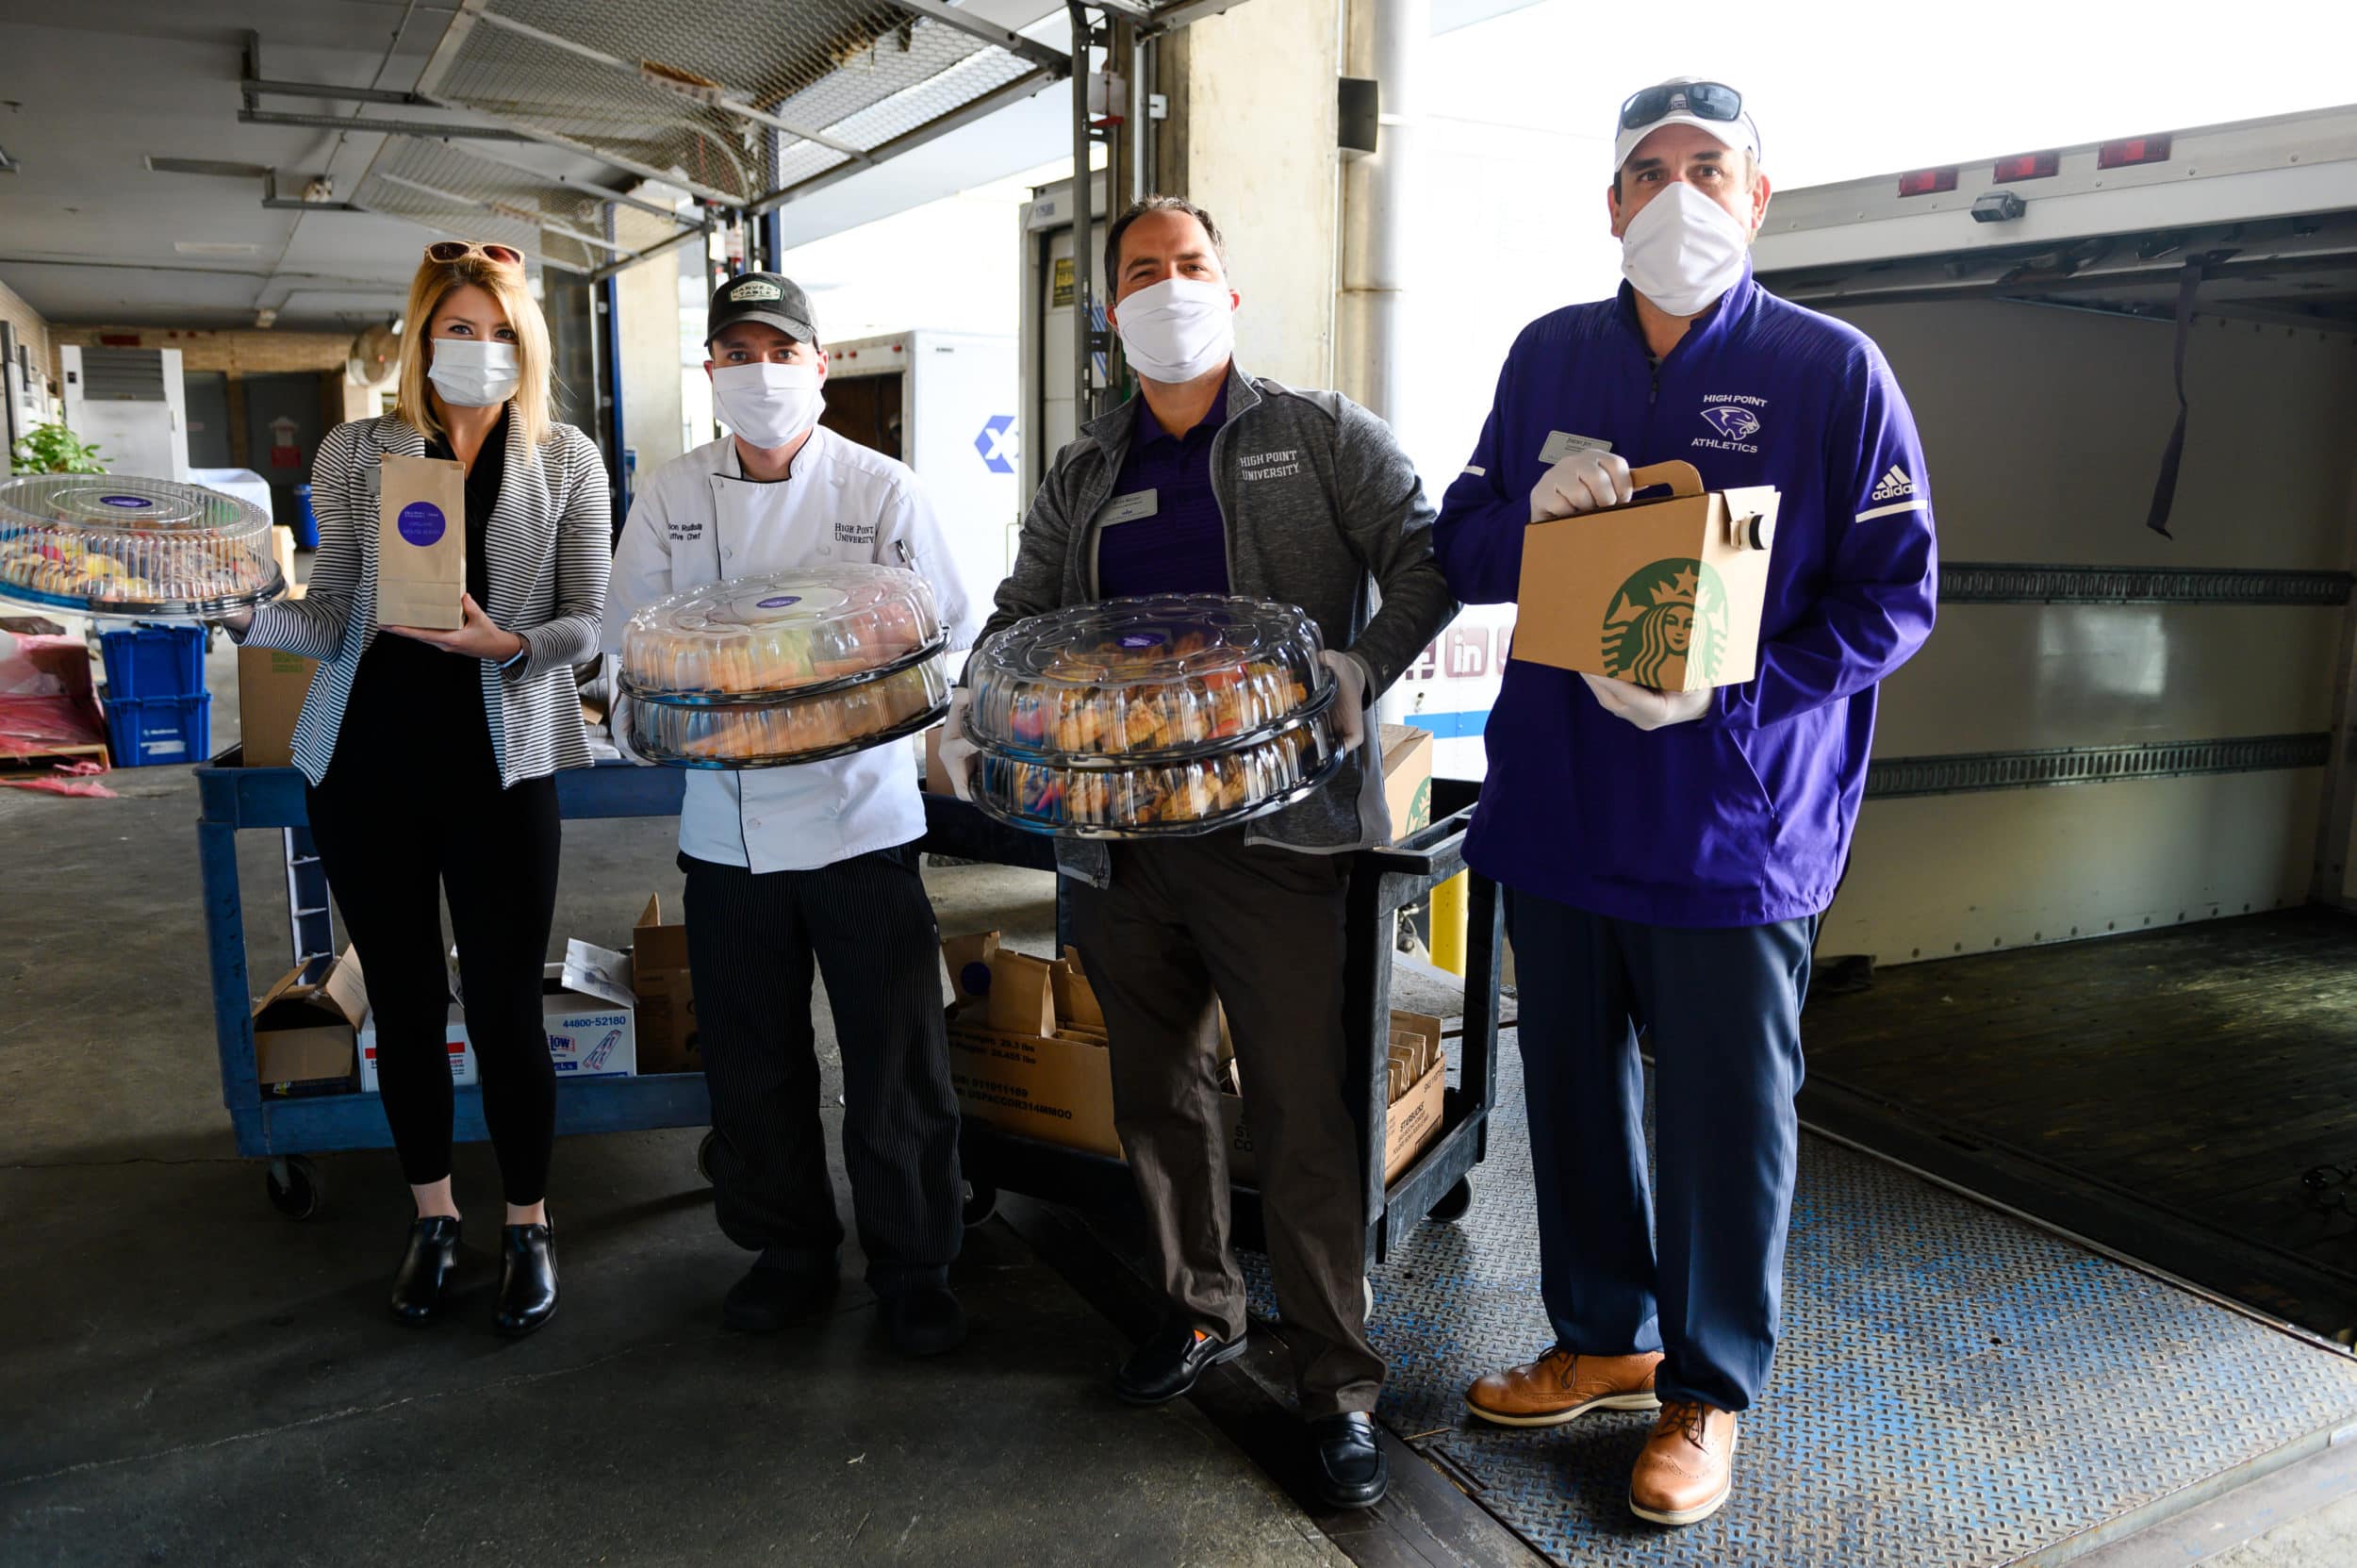 High Point University Dining Team Delivers Food to Nurses in honor of National Nurses Day